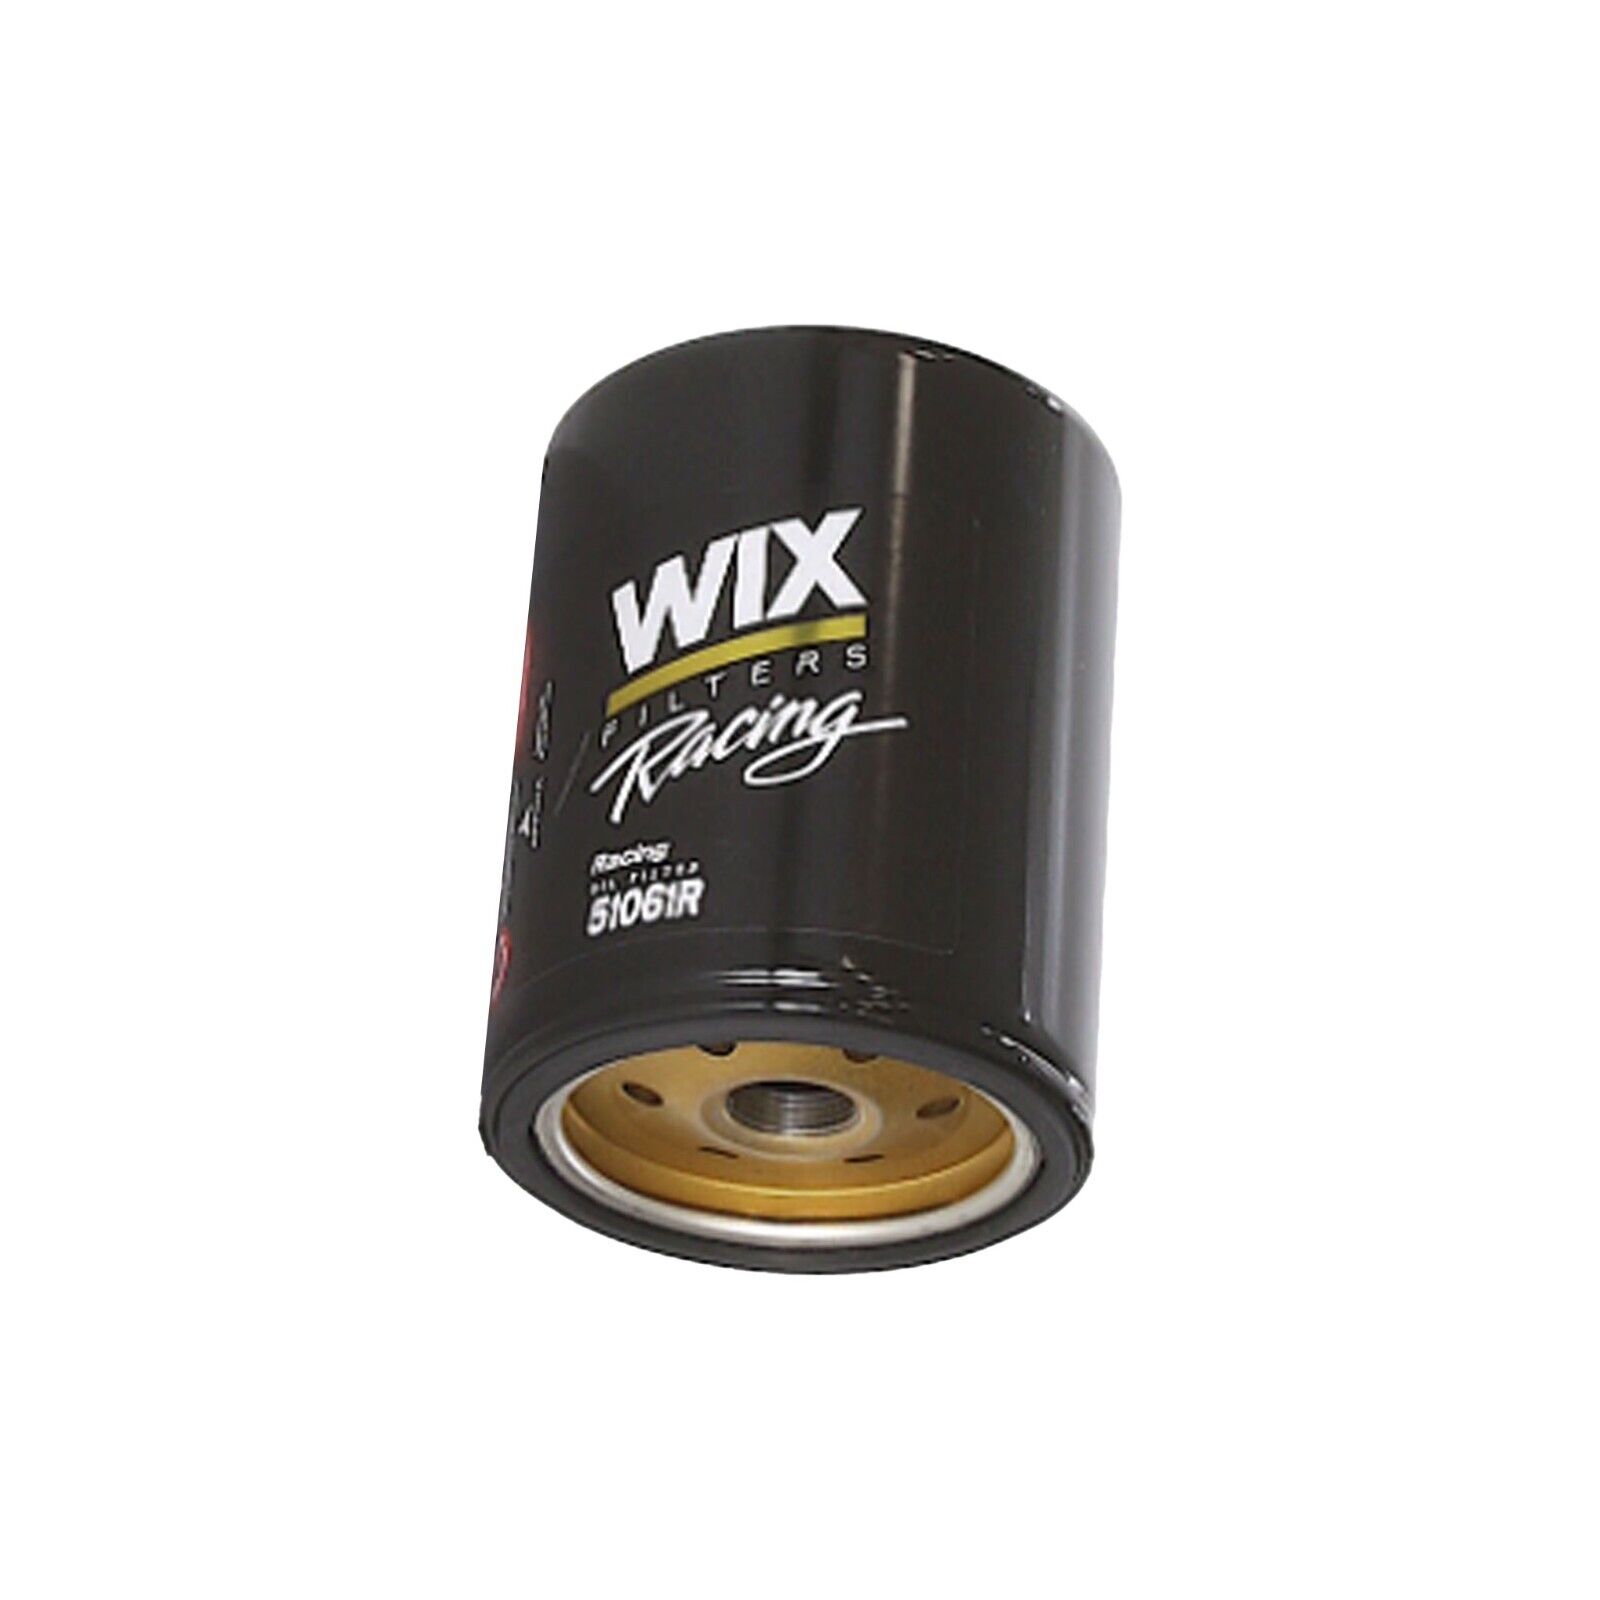 51061R WIX Spin-On Lube Filter (Pack of 5)